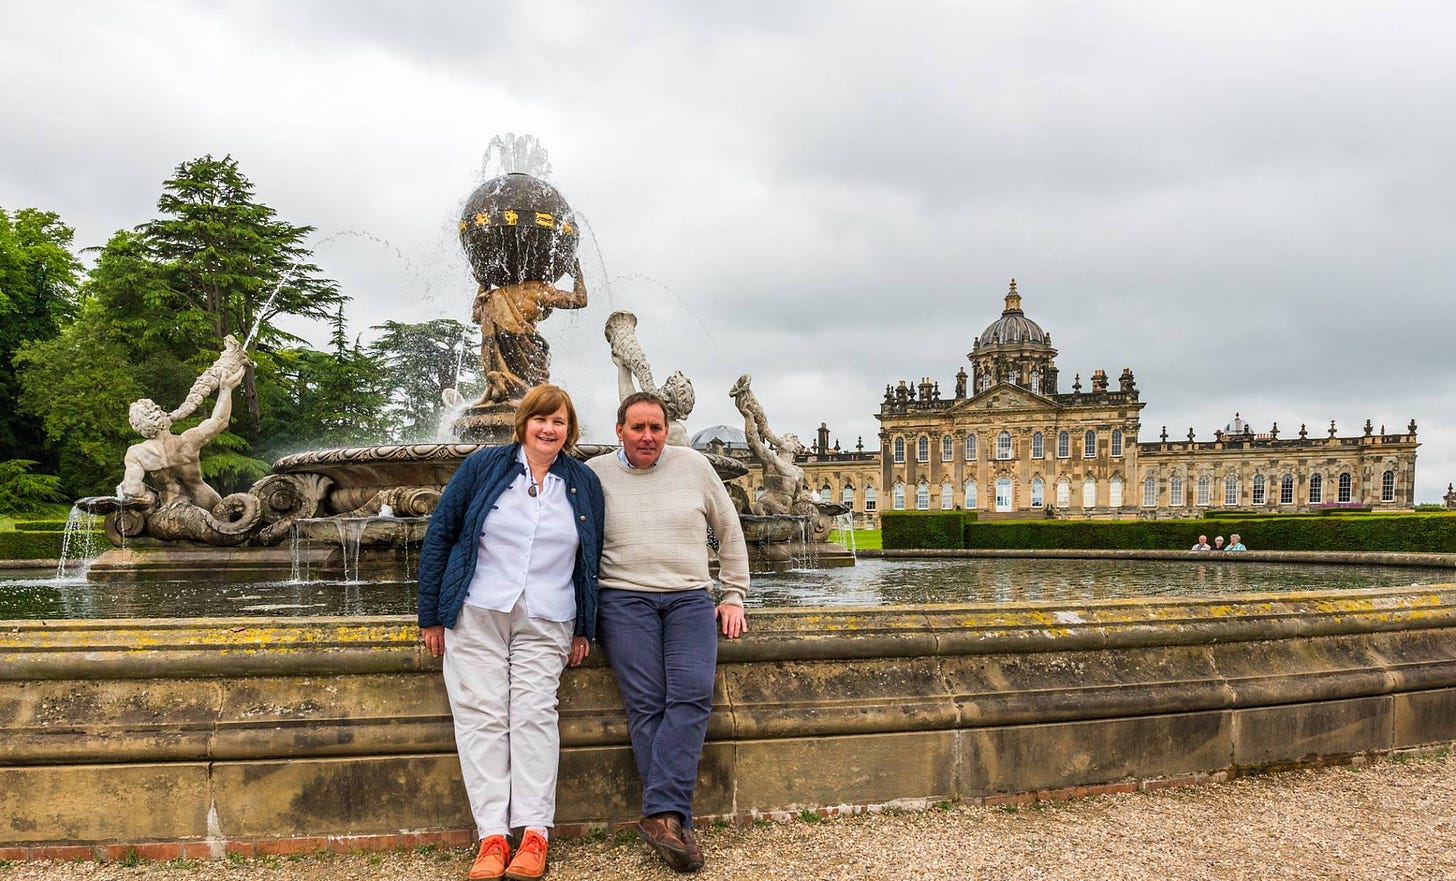 My parents stood outside a fountain in the grounds of Castle Howard, a stately home in North Yorkshire, United Kingdom.